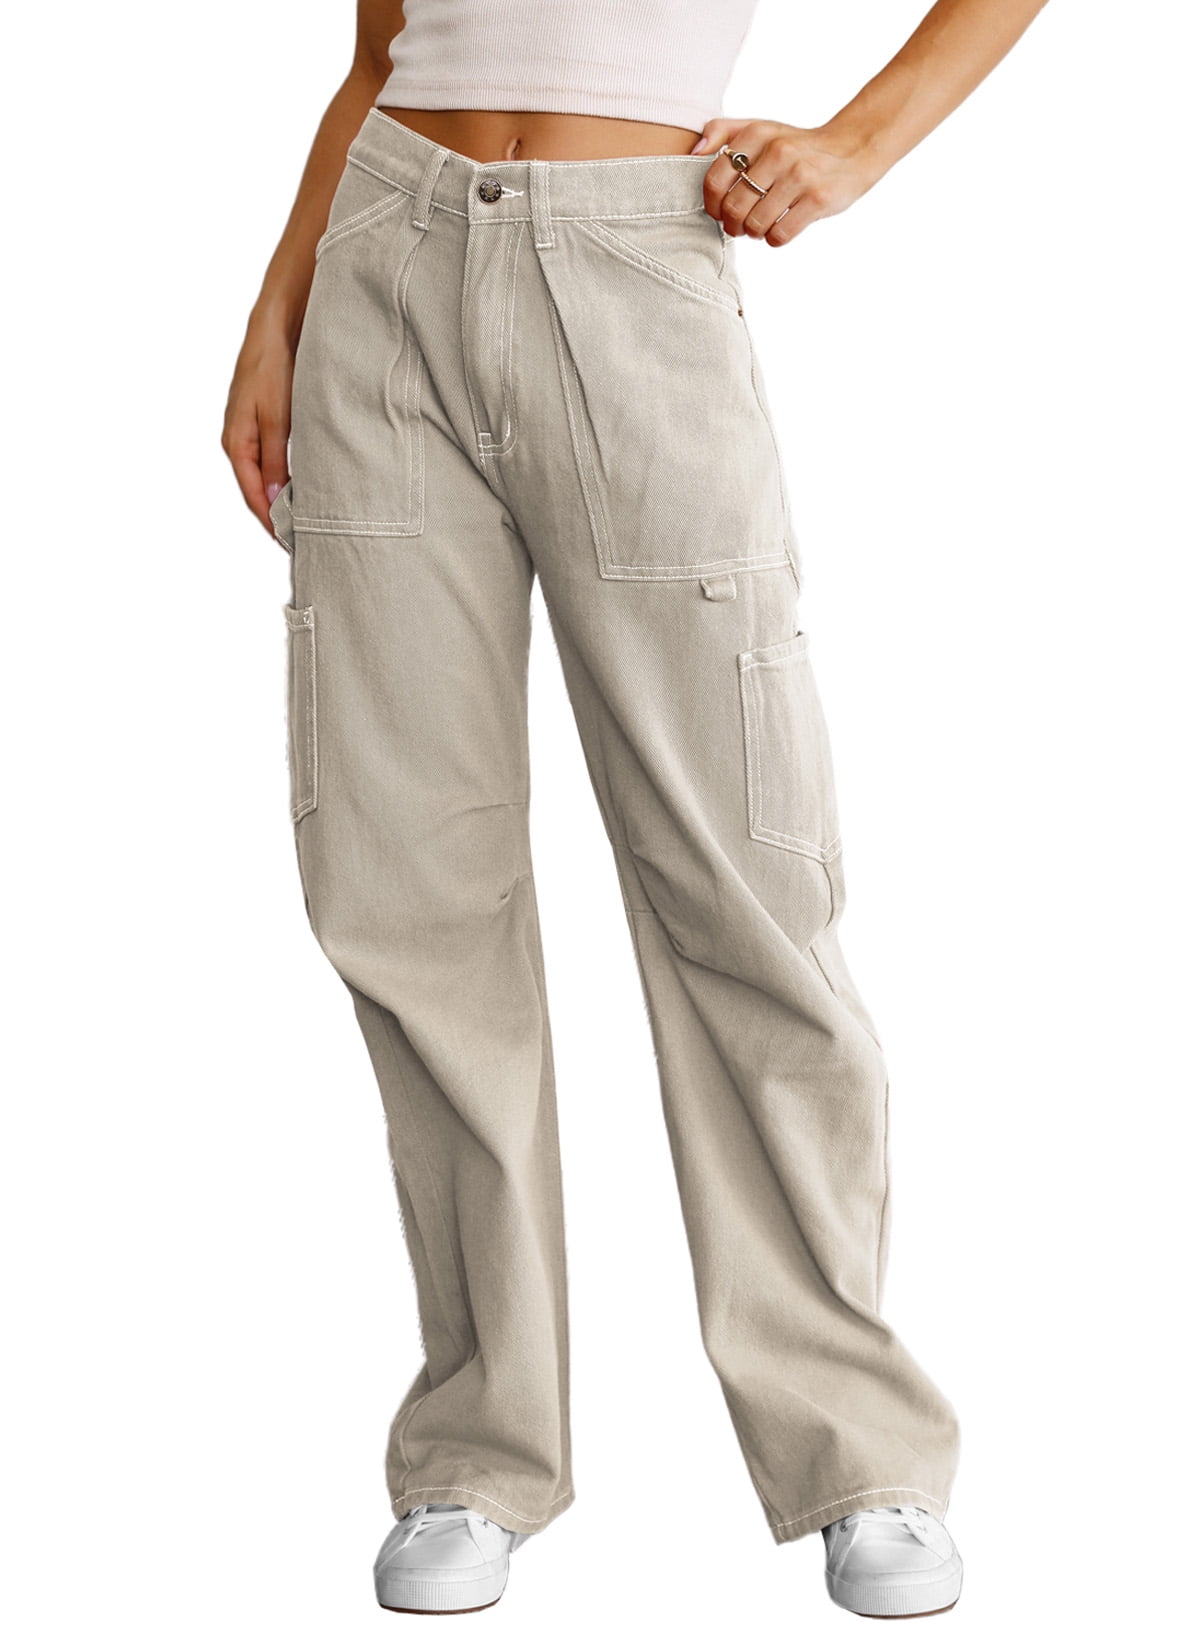 EVALESS Womens Cargo Pants Casual High Waisted Baggy Stretch Wide Leg ...